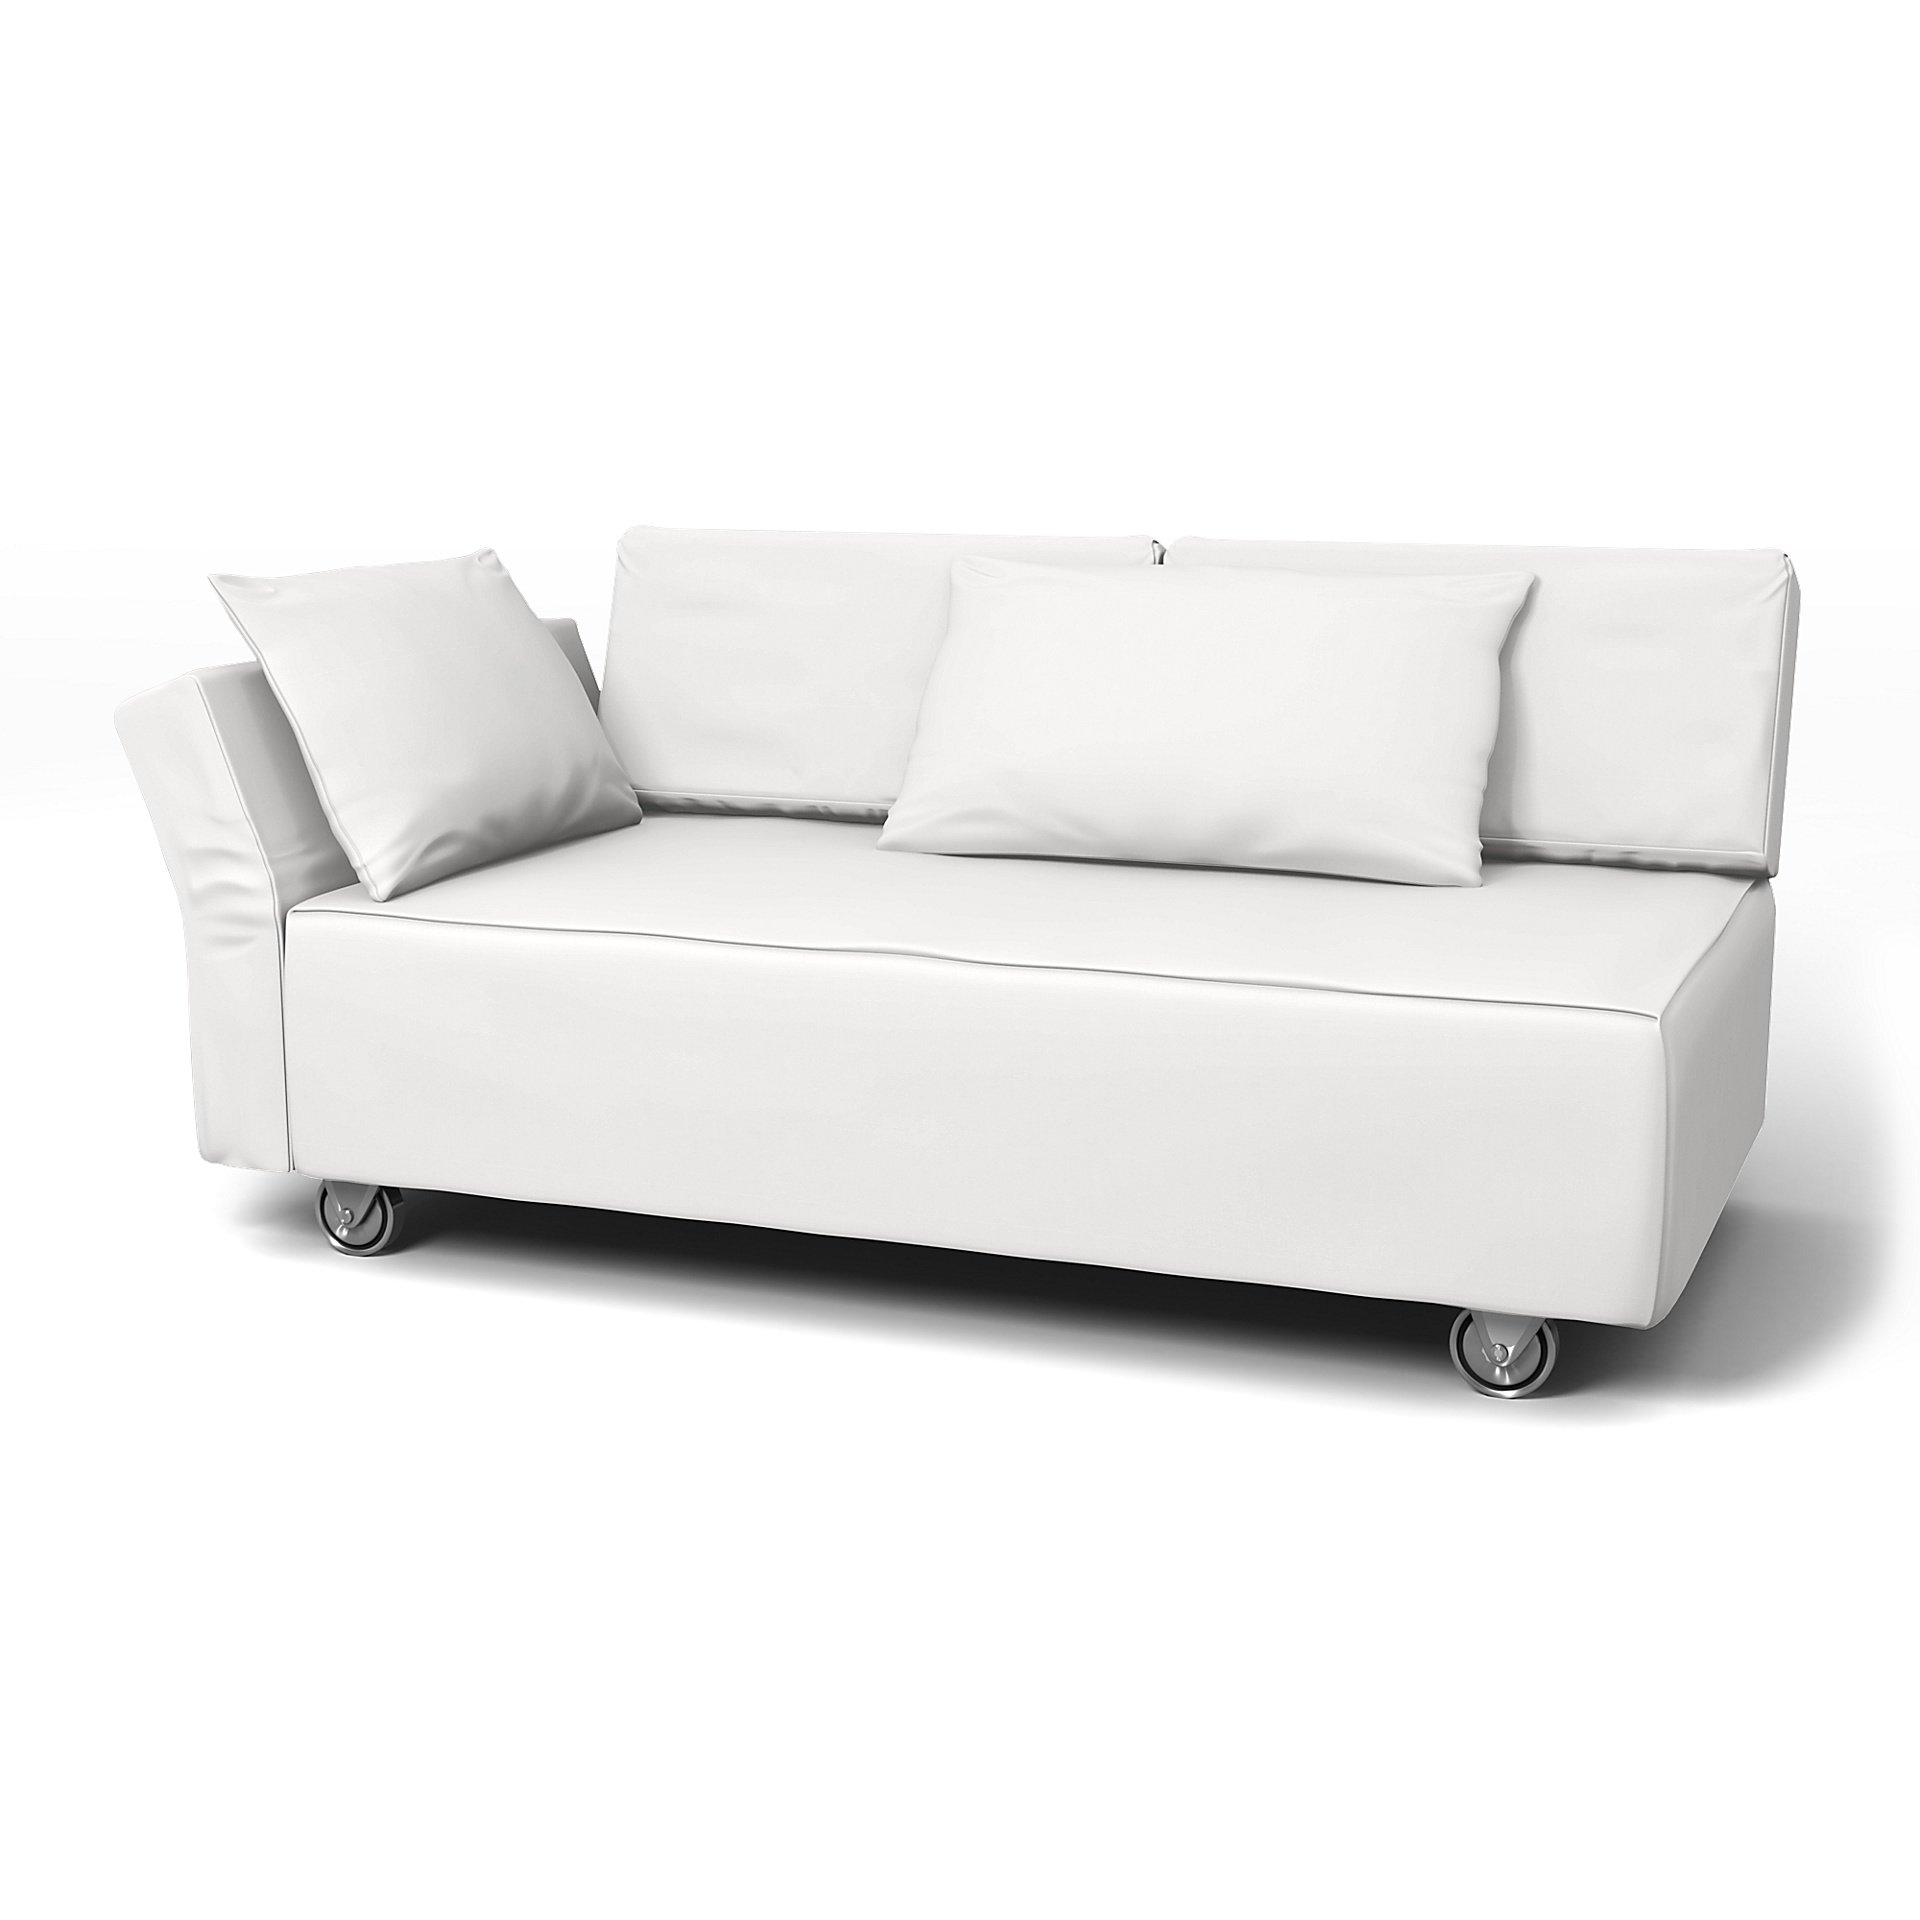 IKEA - Falsterbo 2 Seat Sofa with Left Arm Cover, Absolute White, Cotton - Bemz